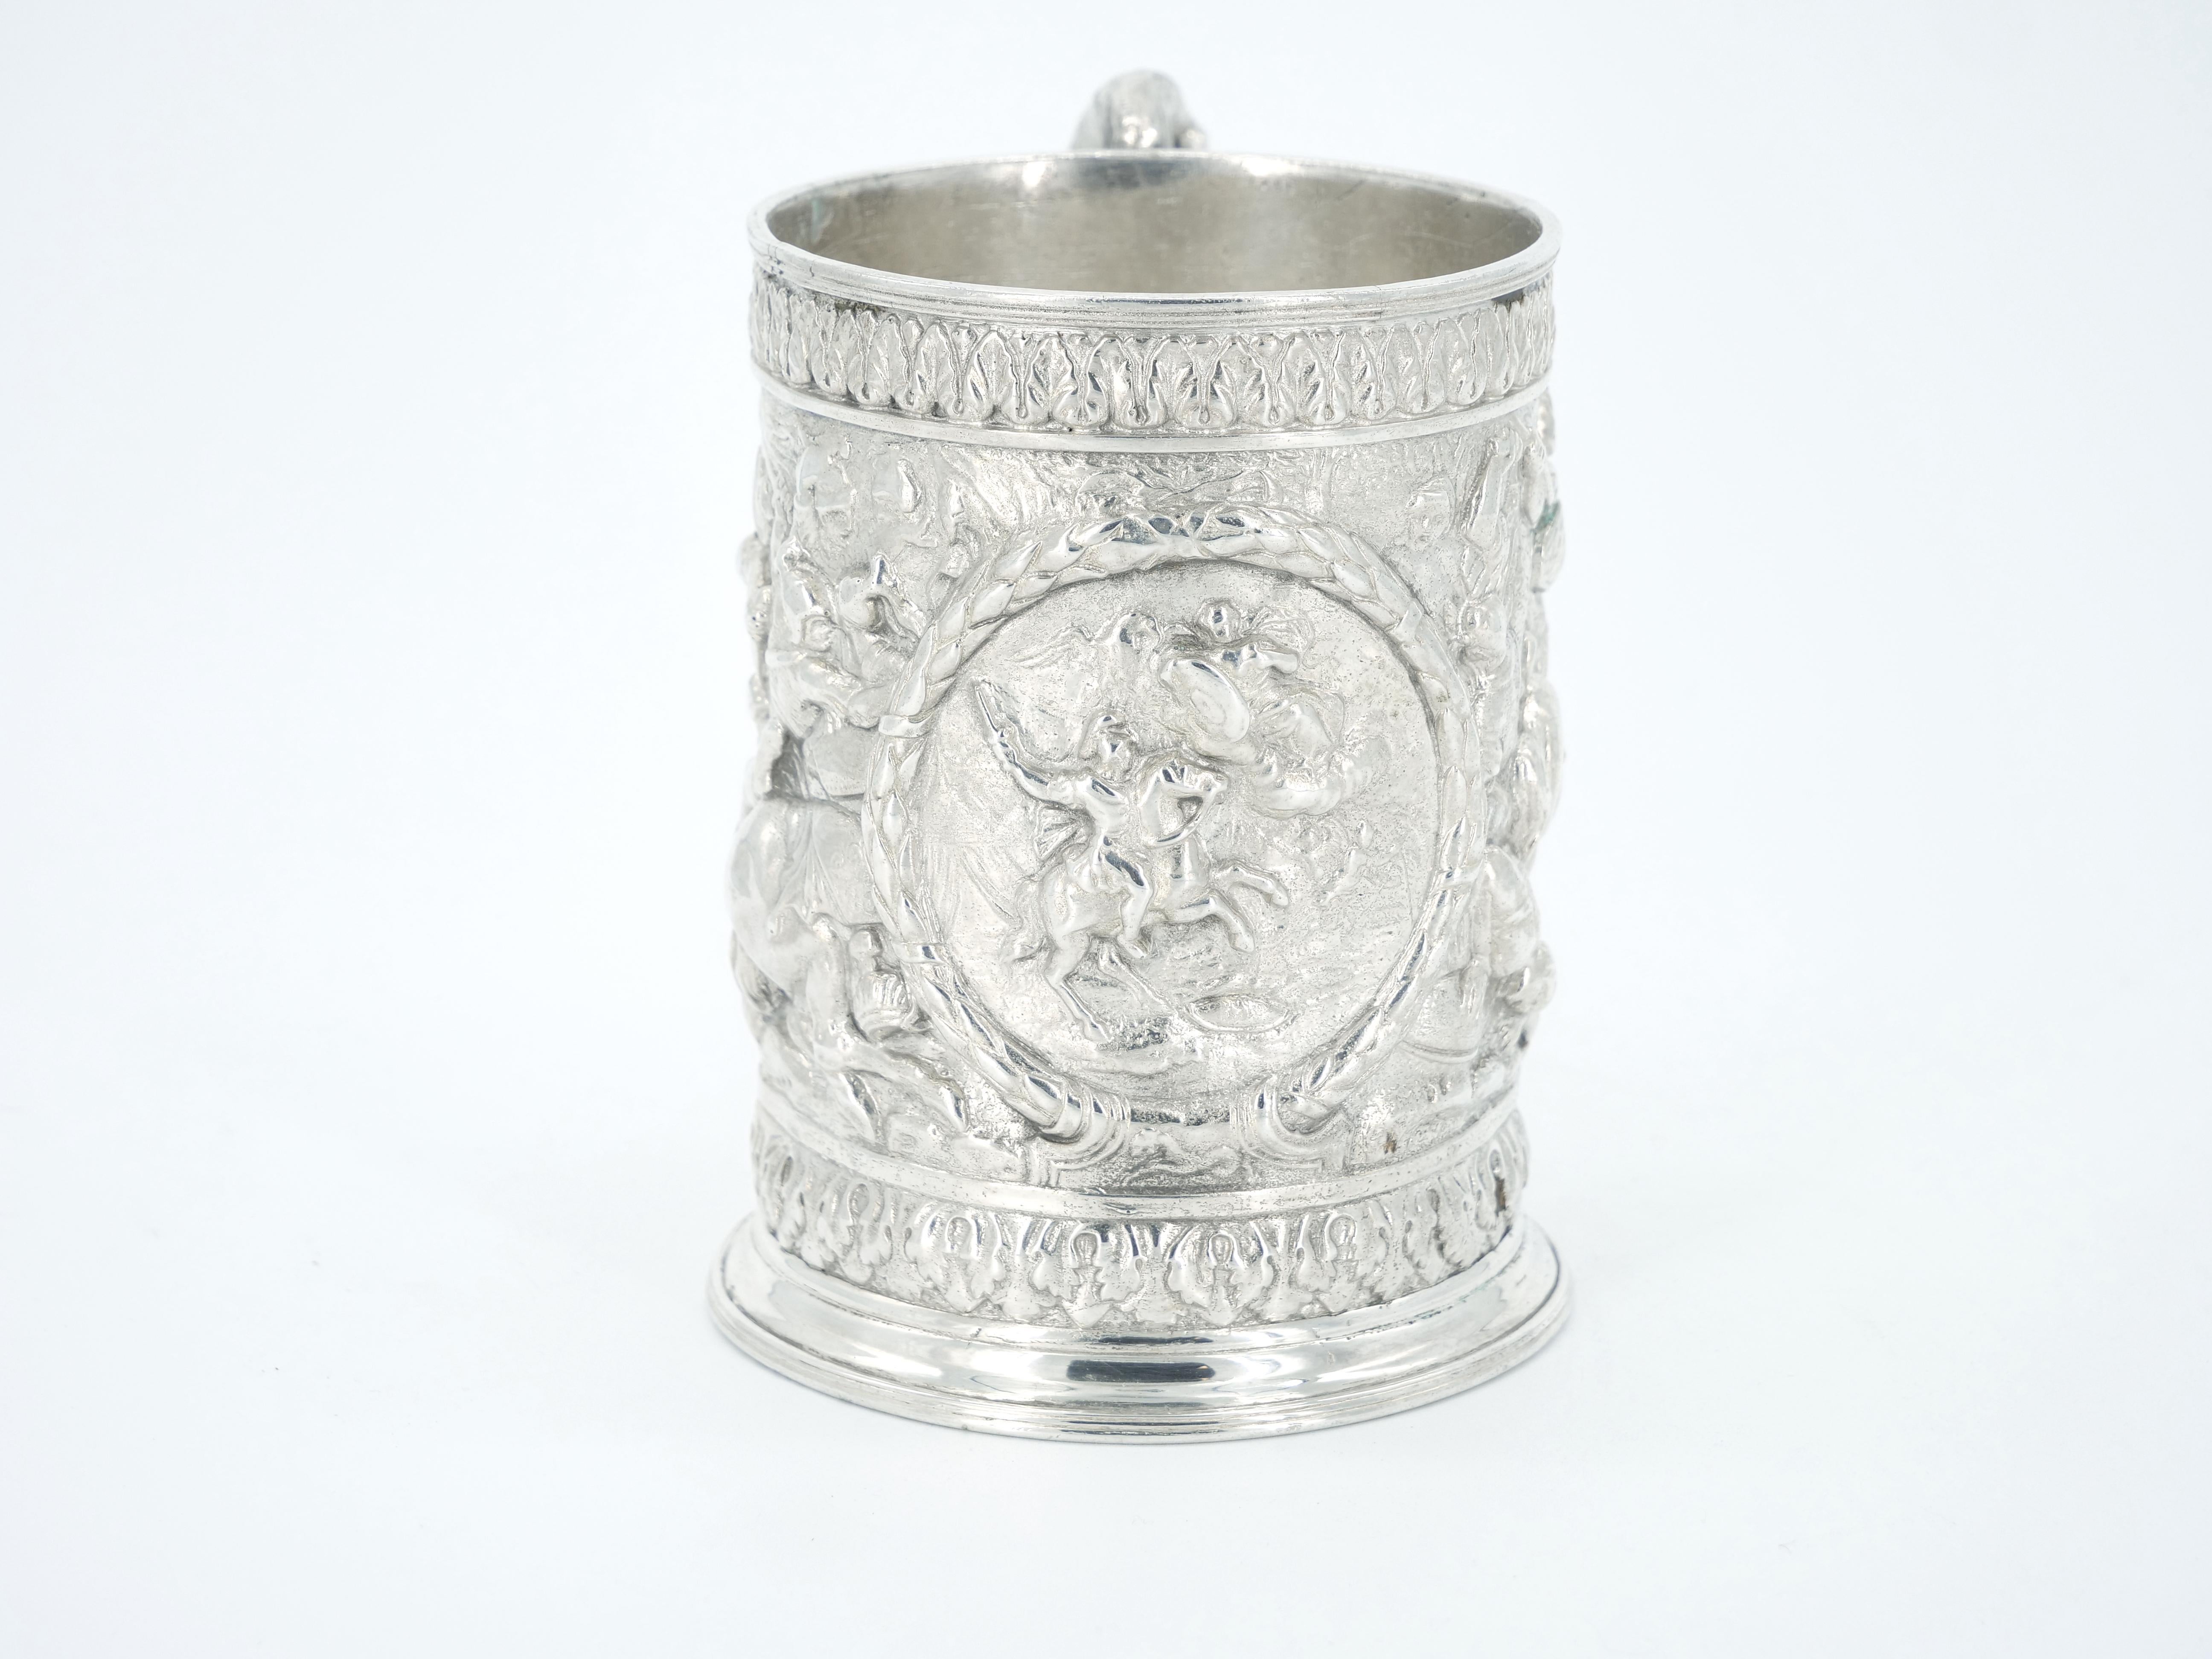 19th Century English Silverplate Barware Mug Depicting Knights in Battle For Sale 3